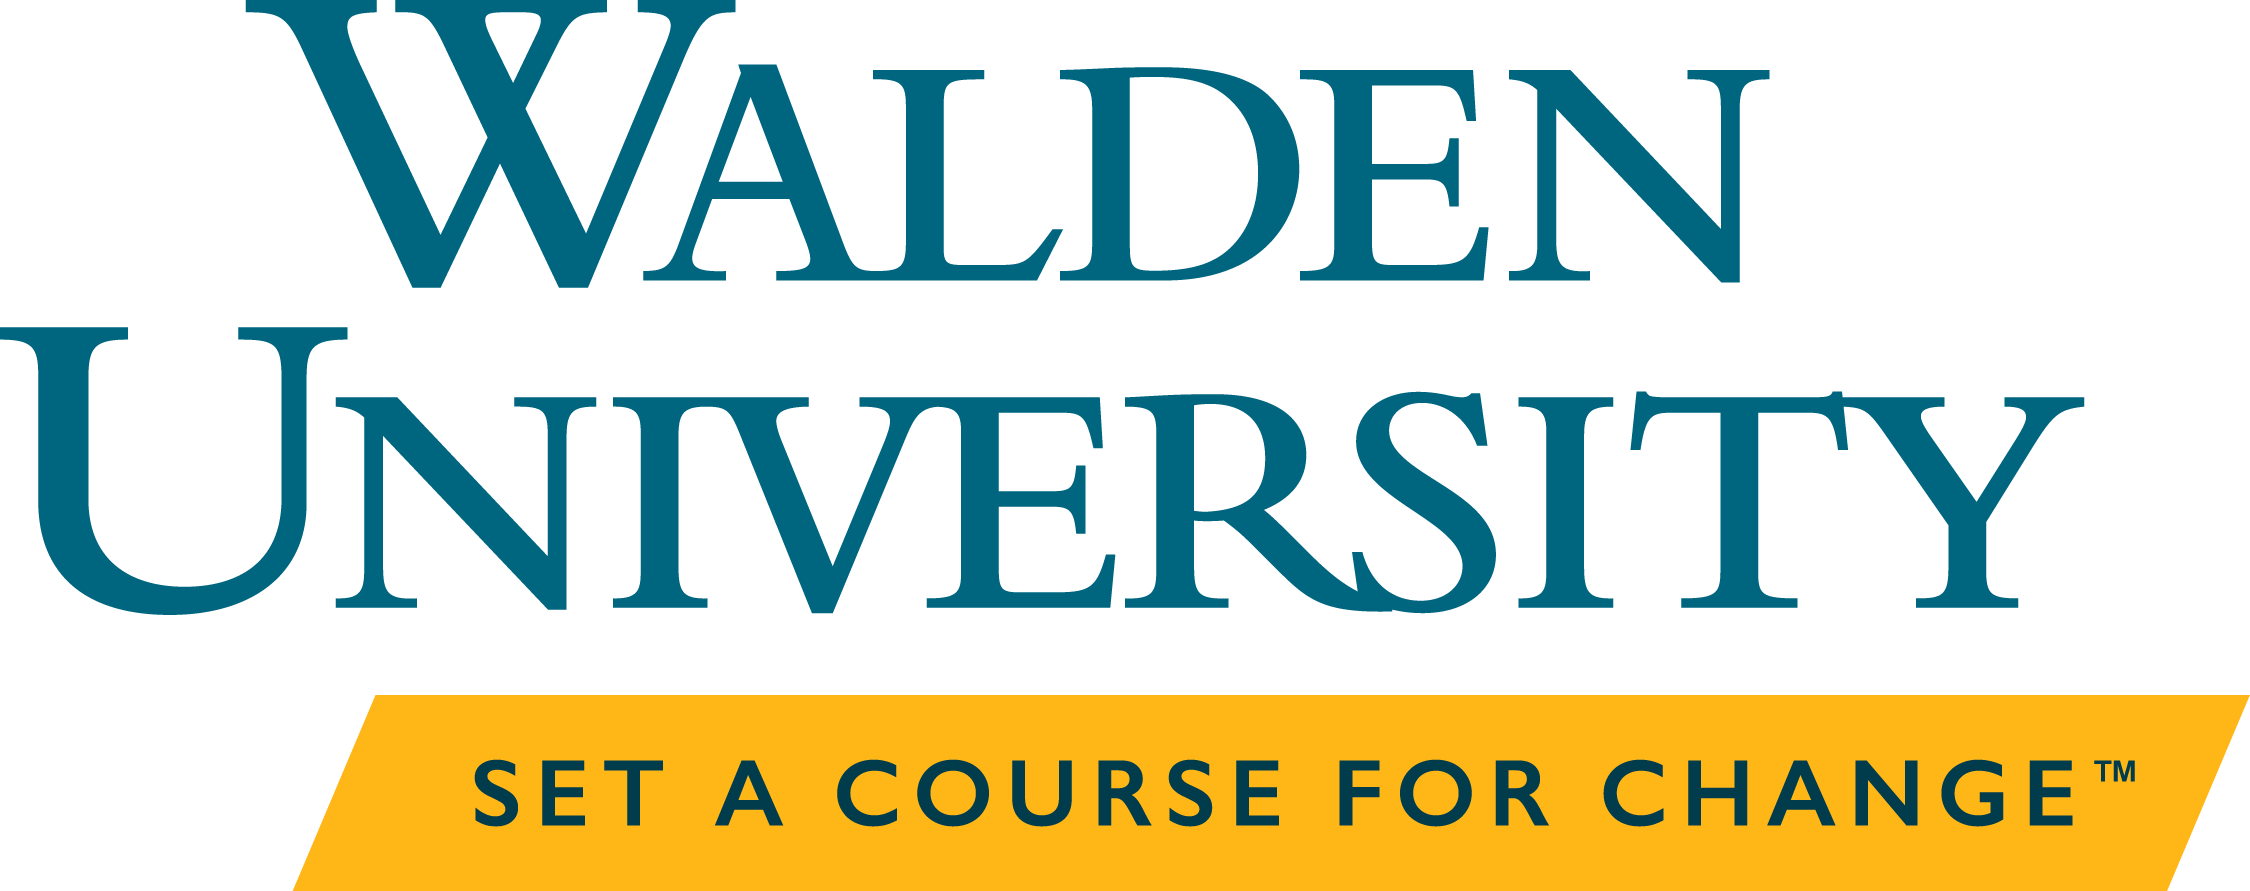 MS in Clinical Mental Health Counseling Program at Walden University